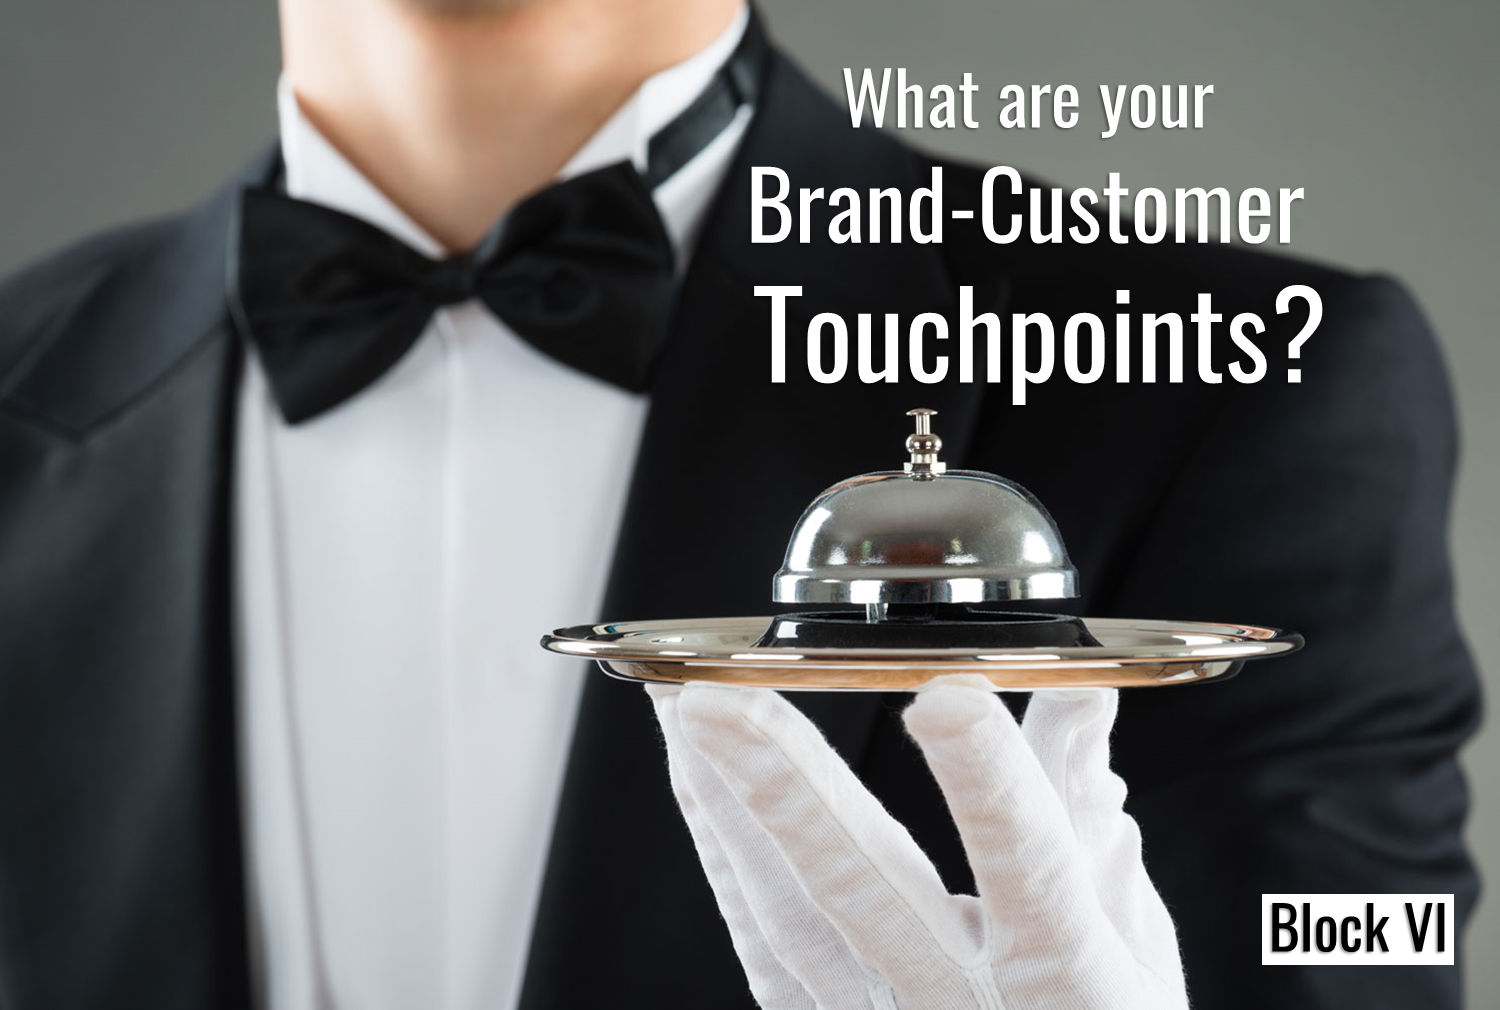 The Brand-Self-Seven Brand Identity Planning Model: Brand Touchpoints